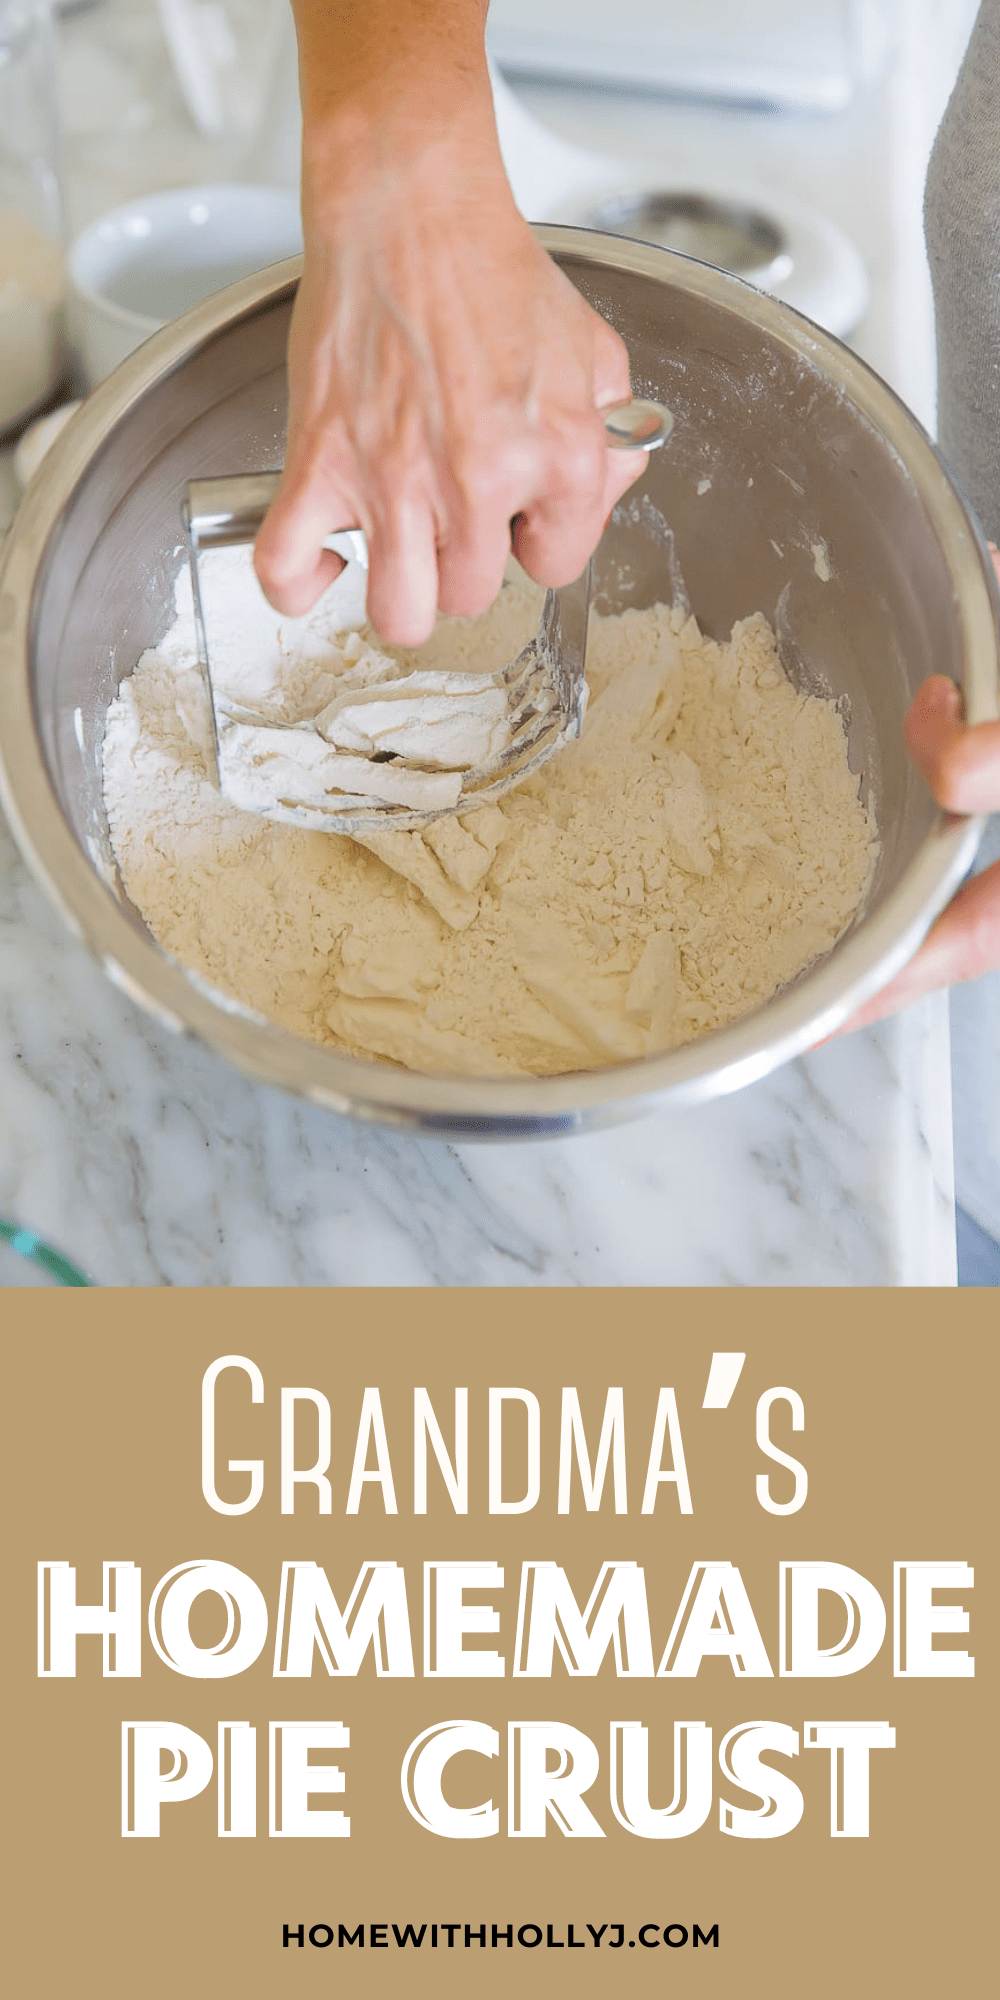 My grandma's homemade pie crust recipe is the best. It's so delicious, easy to make, and a favorite of our family.